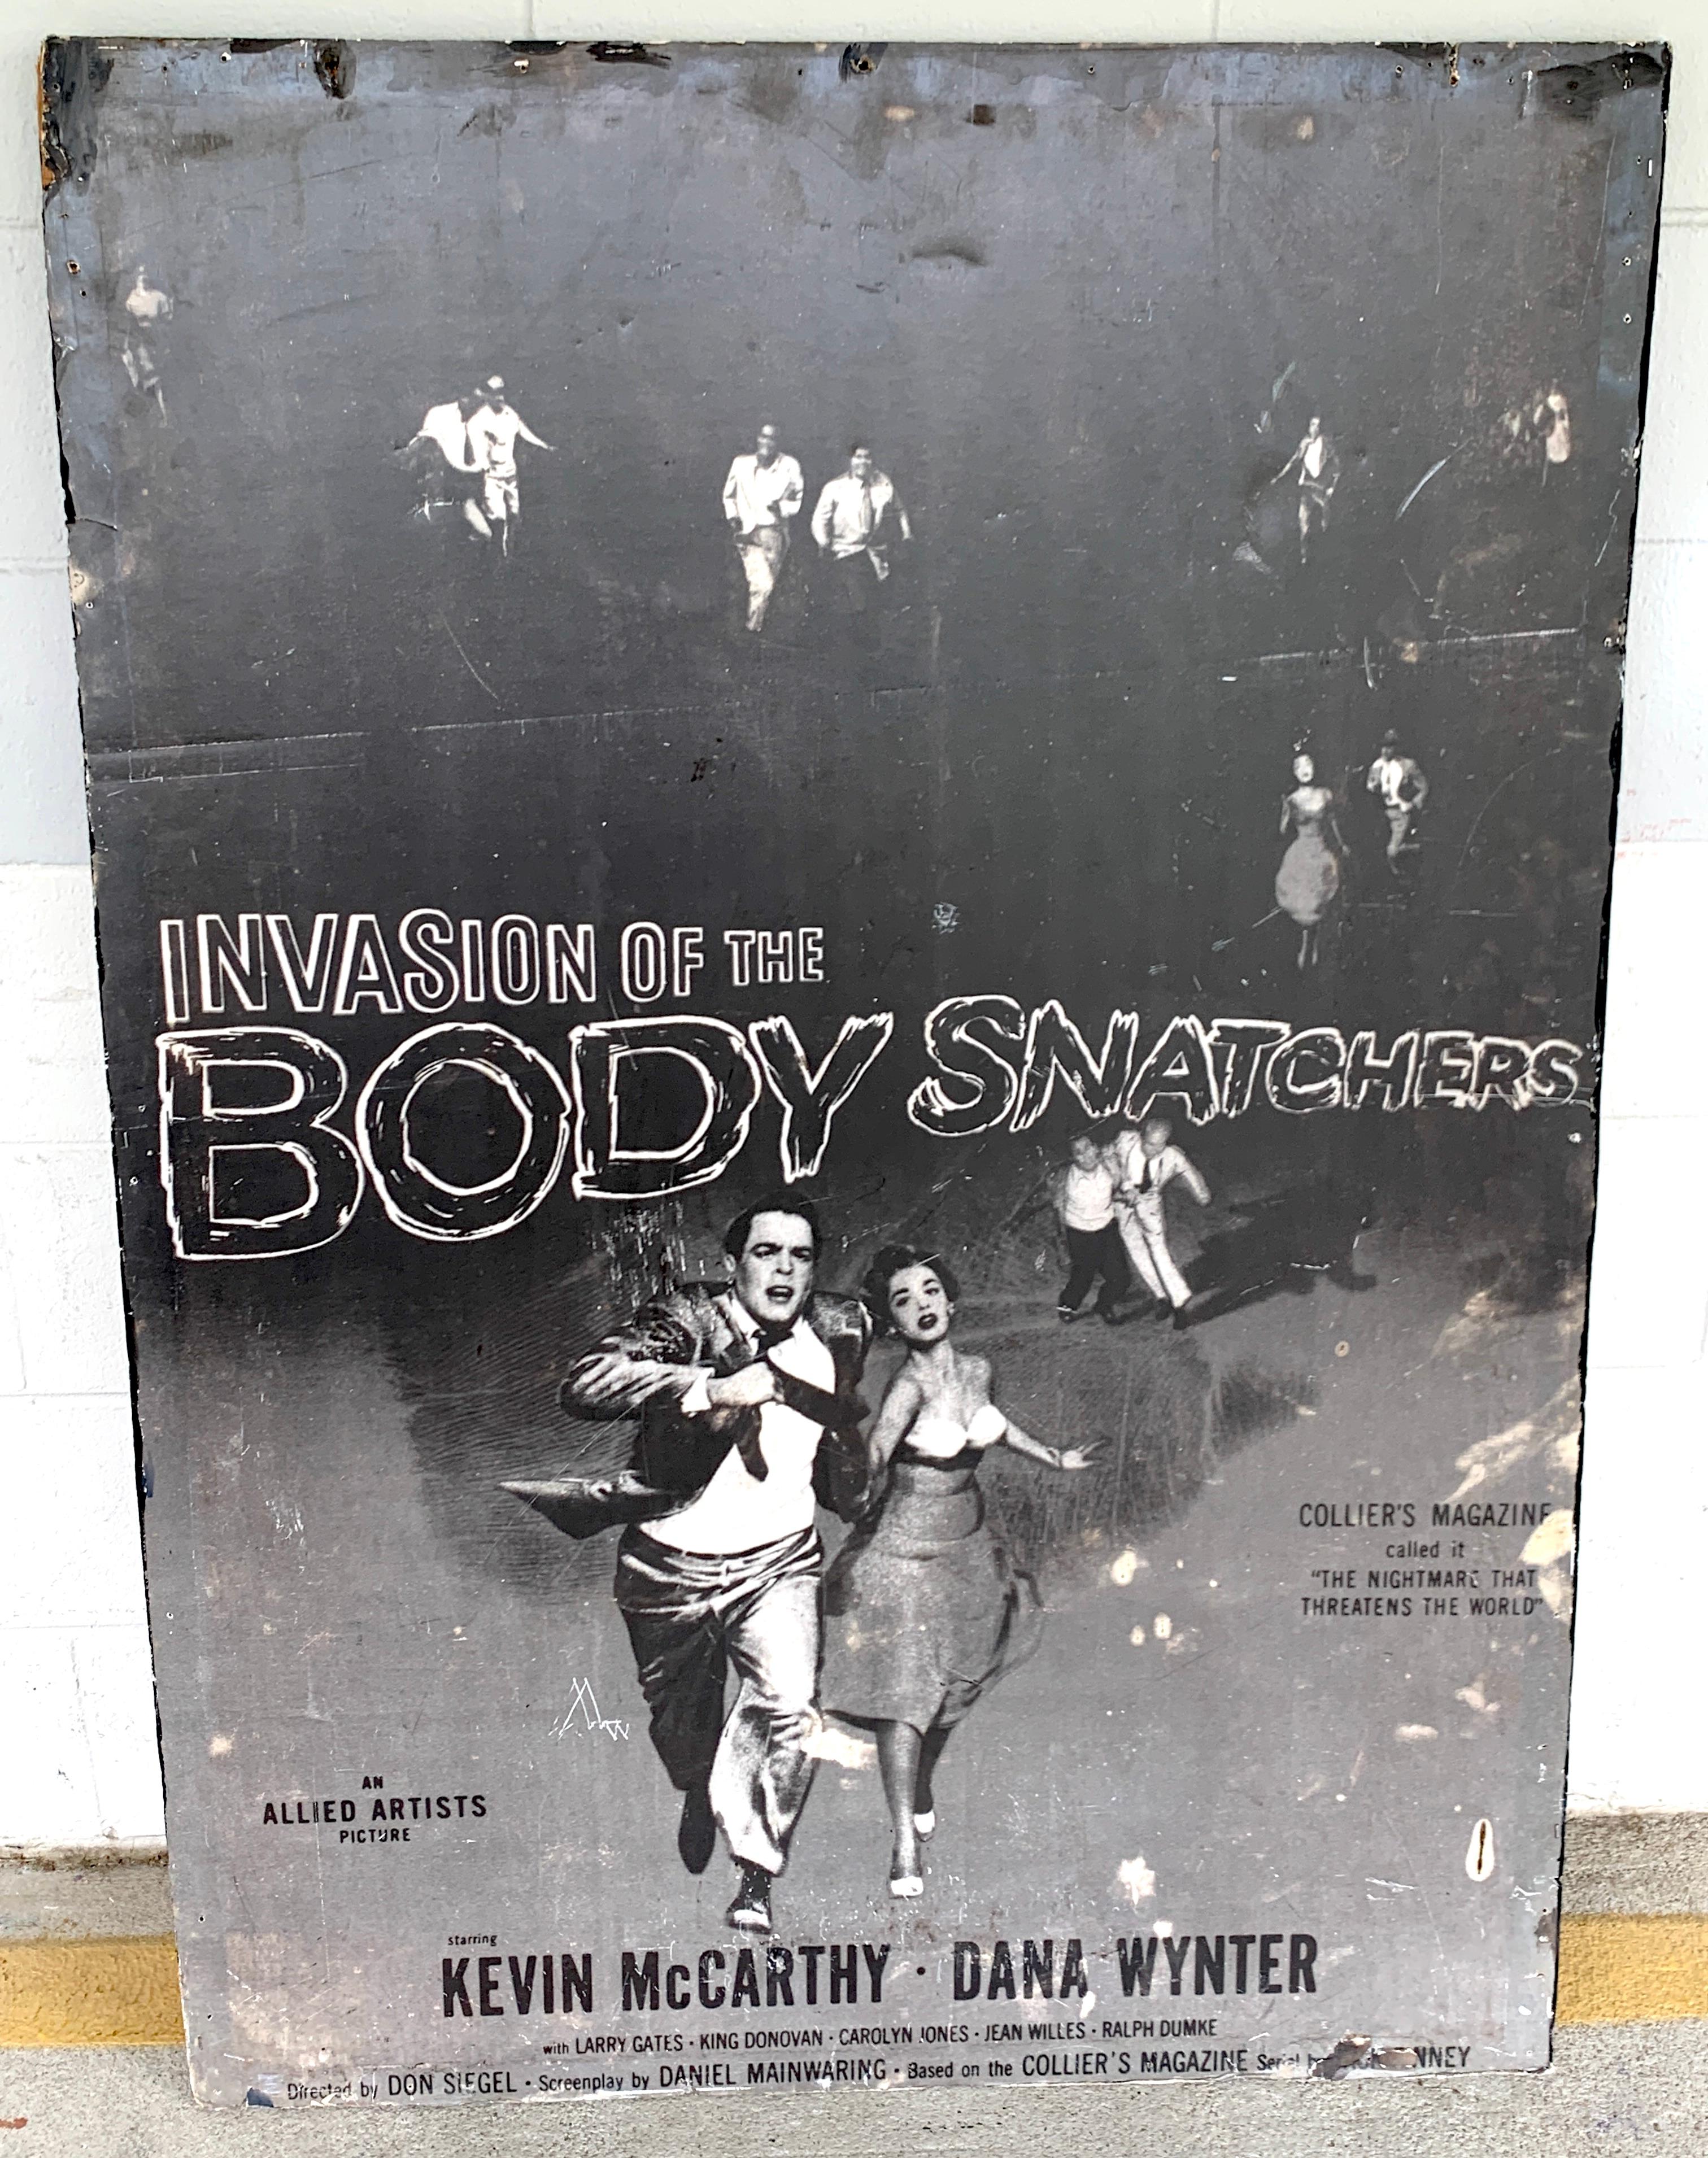 Invasion of the Body Snatchers, black & white movie theatre poster, 1956
A rare poster, color versions are available, black and white posters are scarce. This poster for the groundbreaking American science fiction horror film produced by Walter